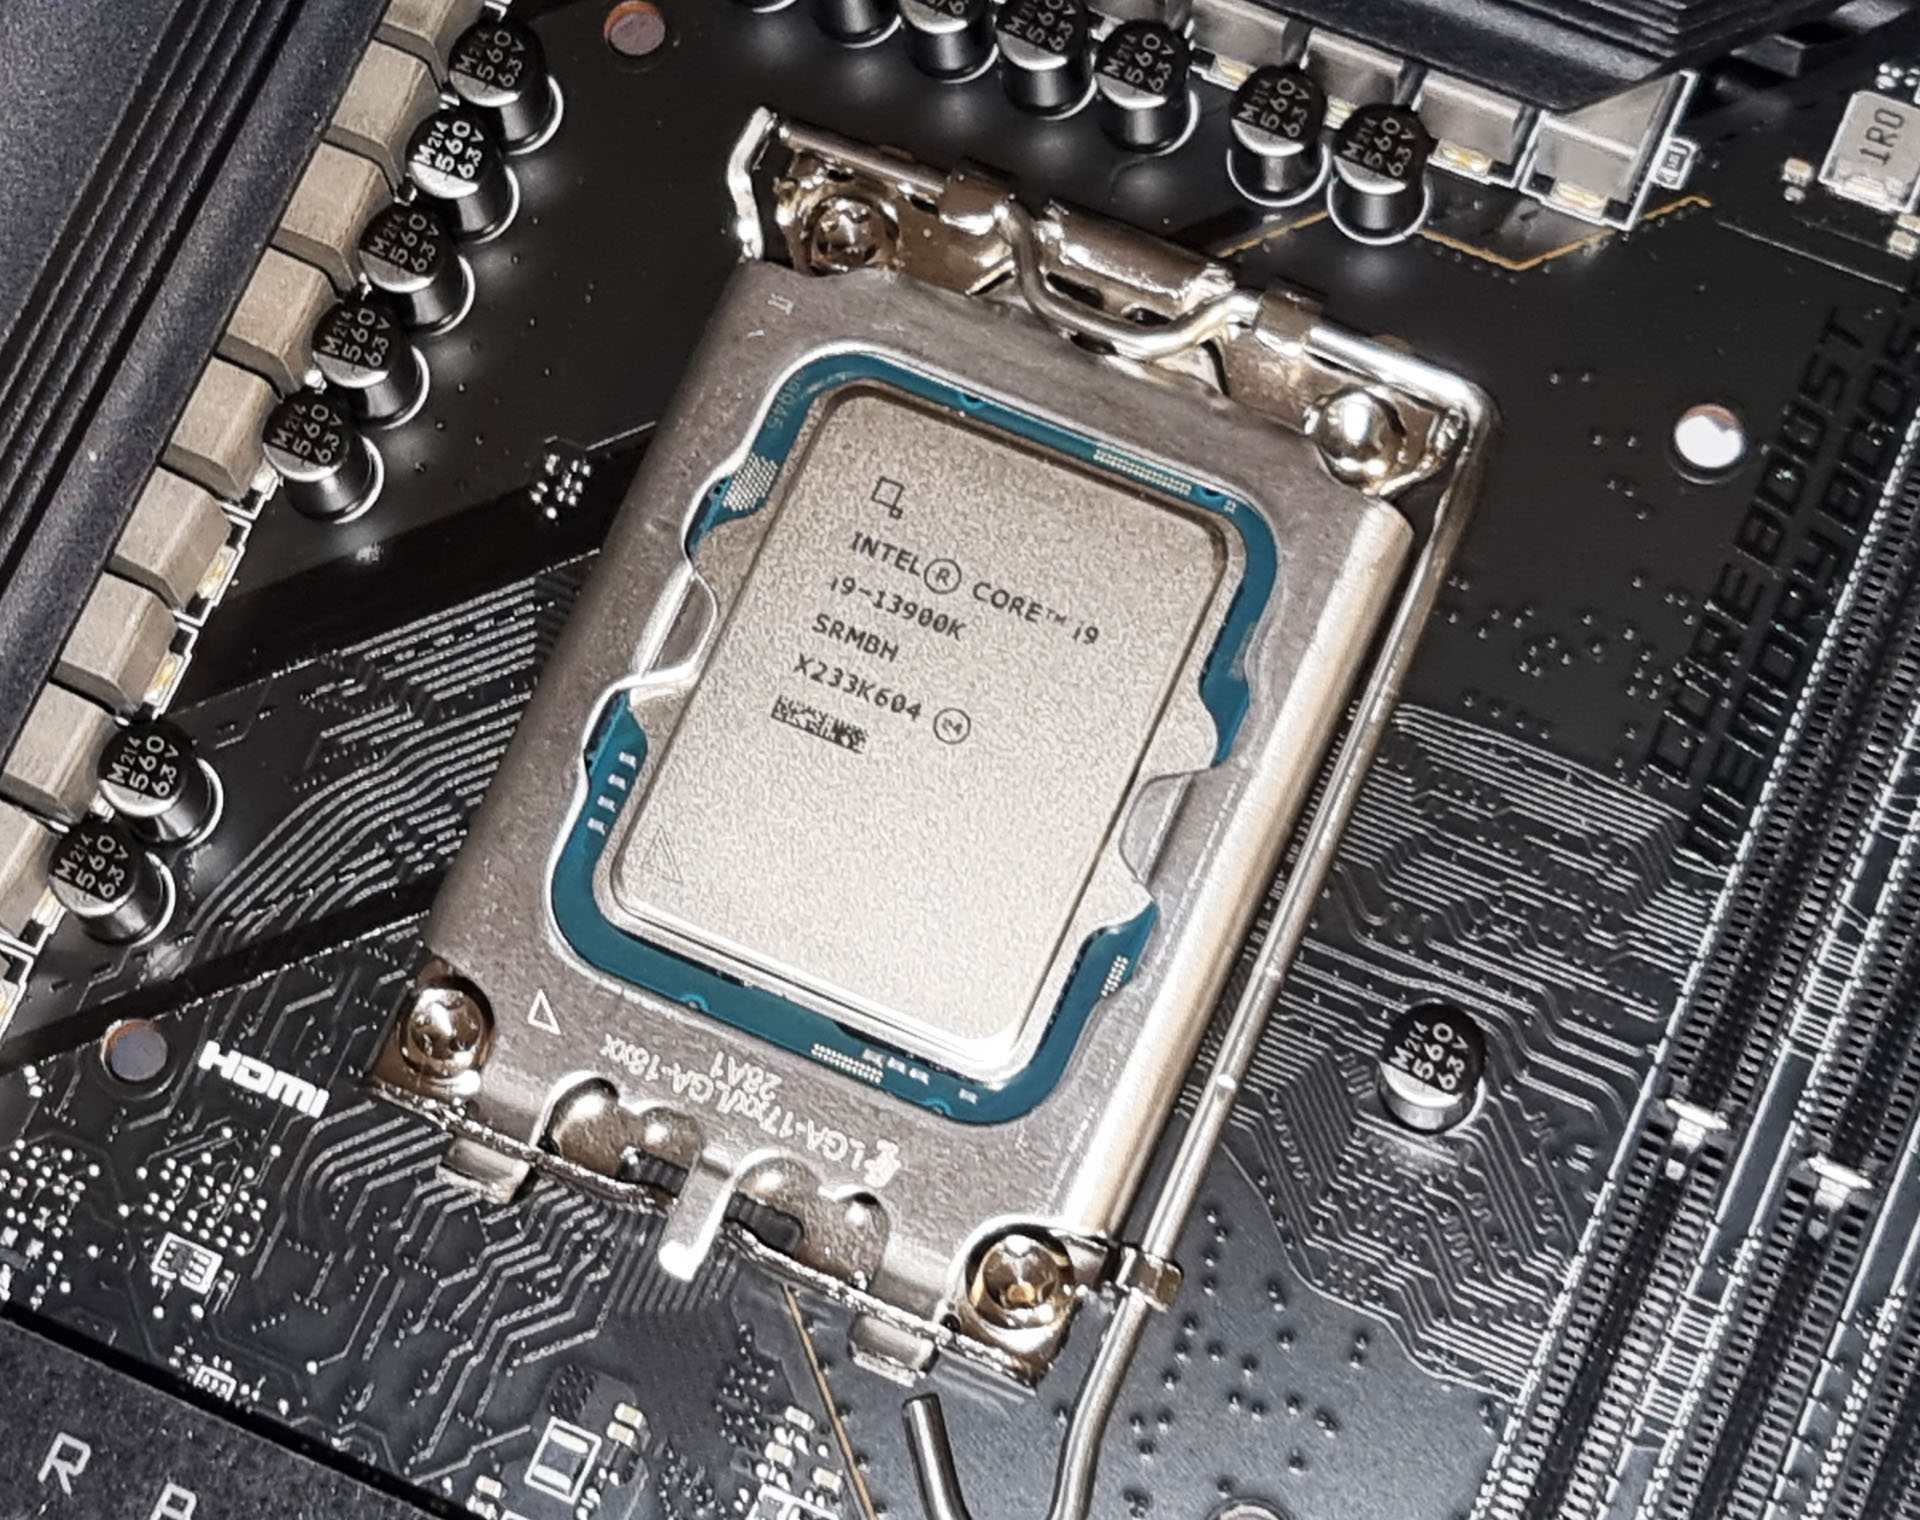 Closing Thoughts - Intel Core i9-13900K and i5-13600K Review